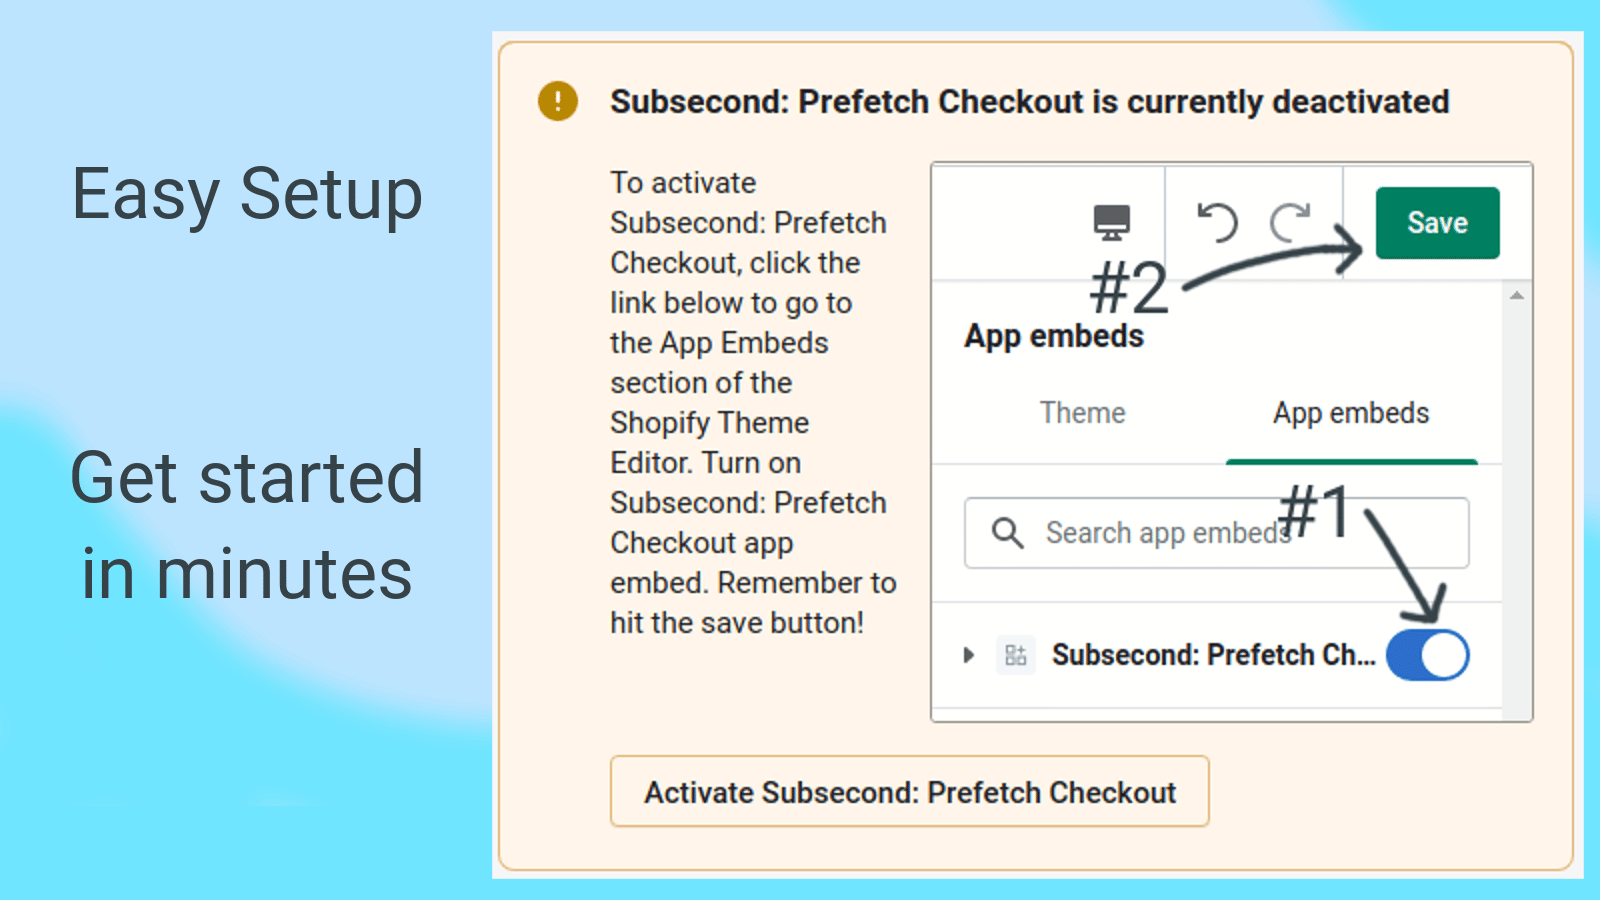 Subsecond: Prefetch Checkout